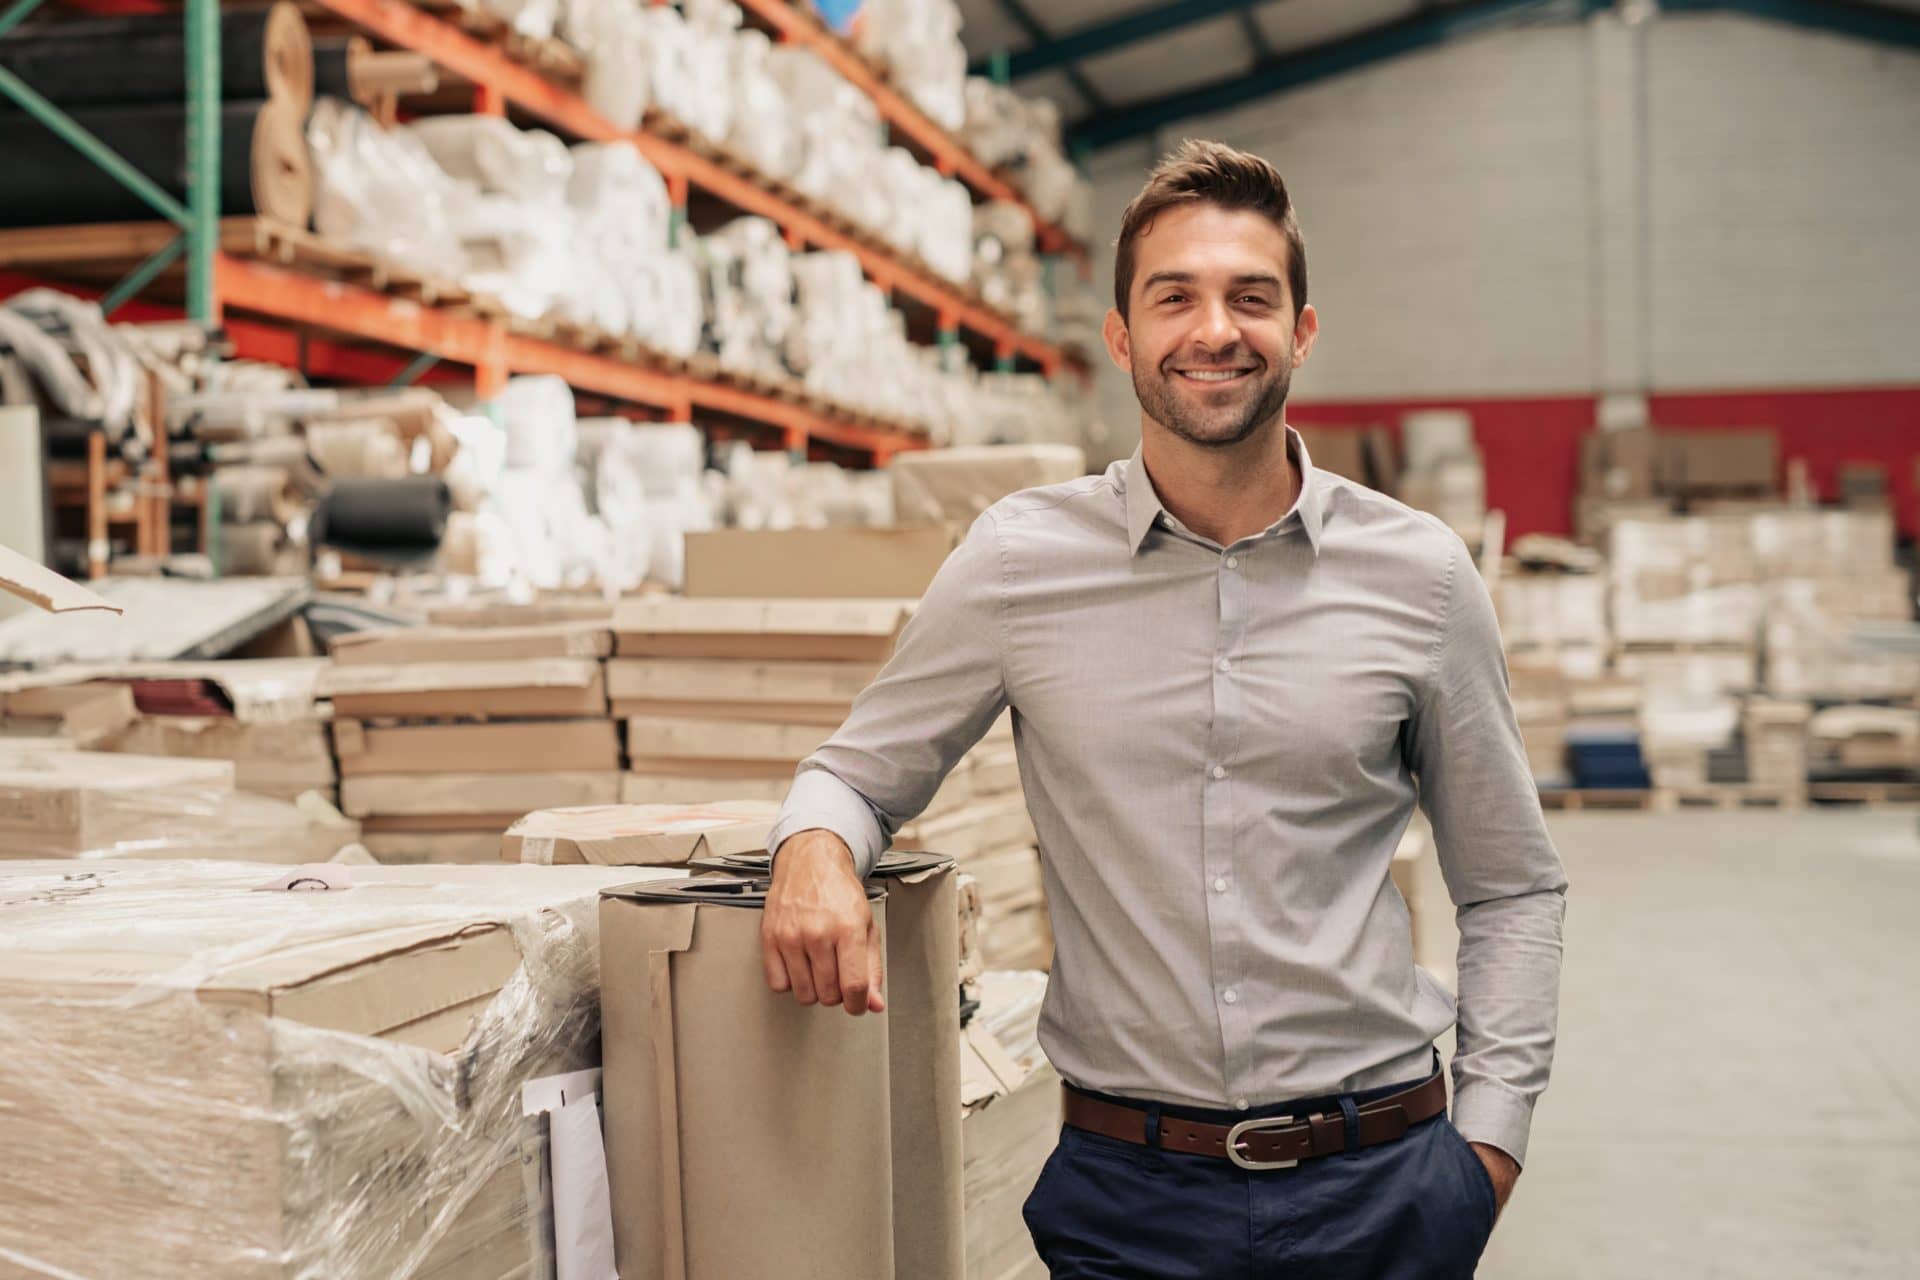 Manager smiling while leaning against stock in a large warehouse